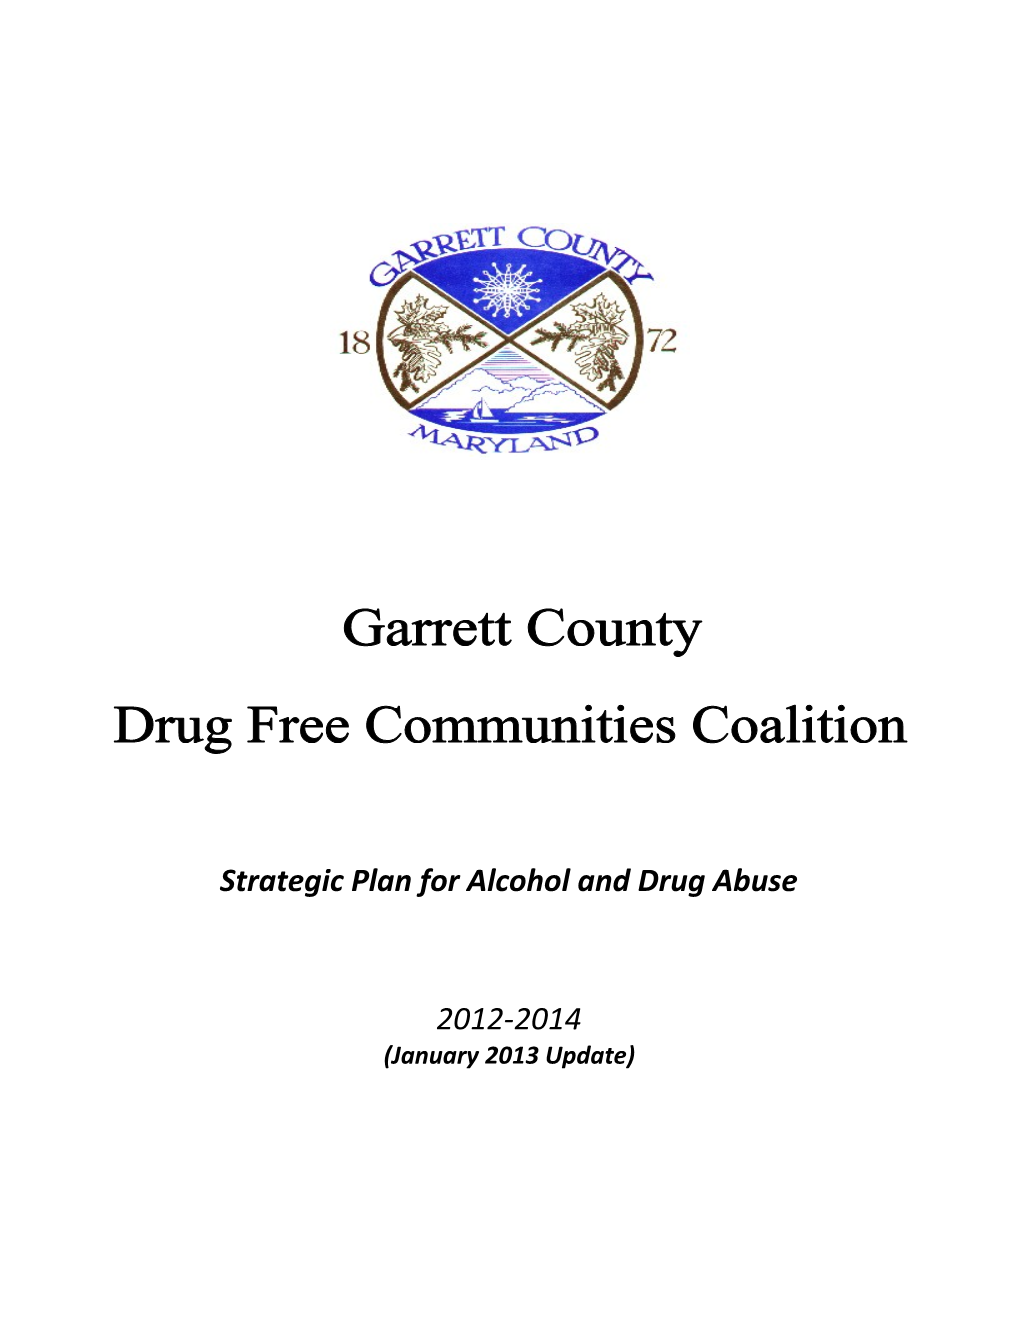 Strategic Plan for Alcohol and Drug Abuse s1